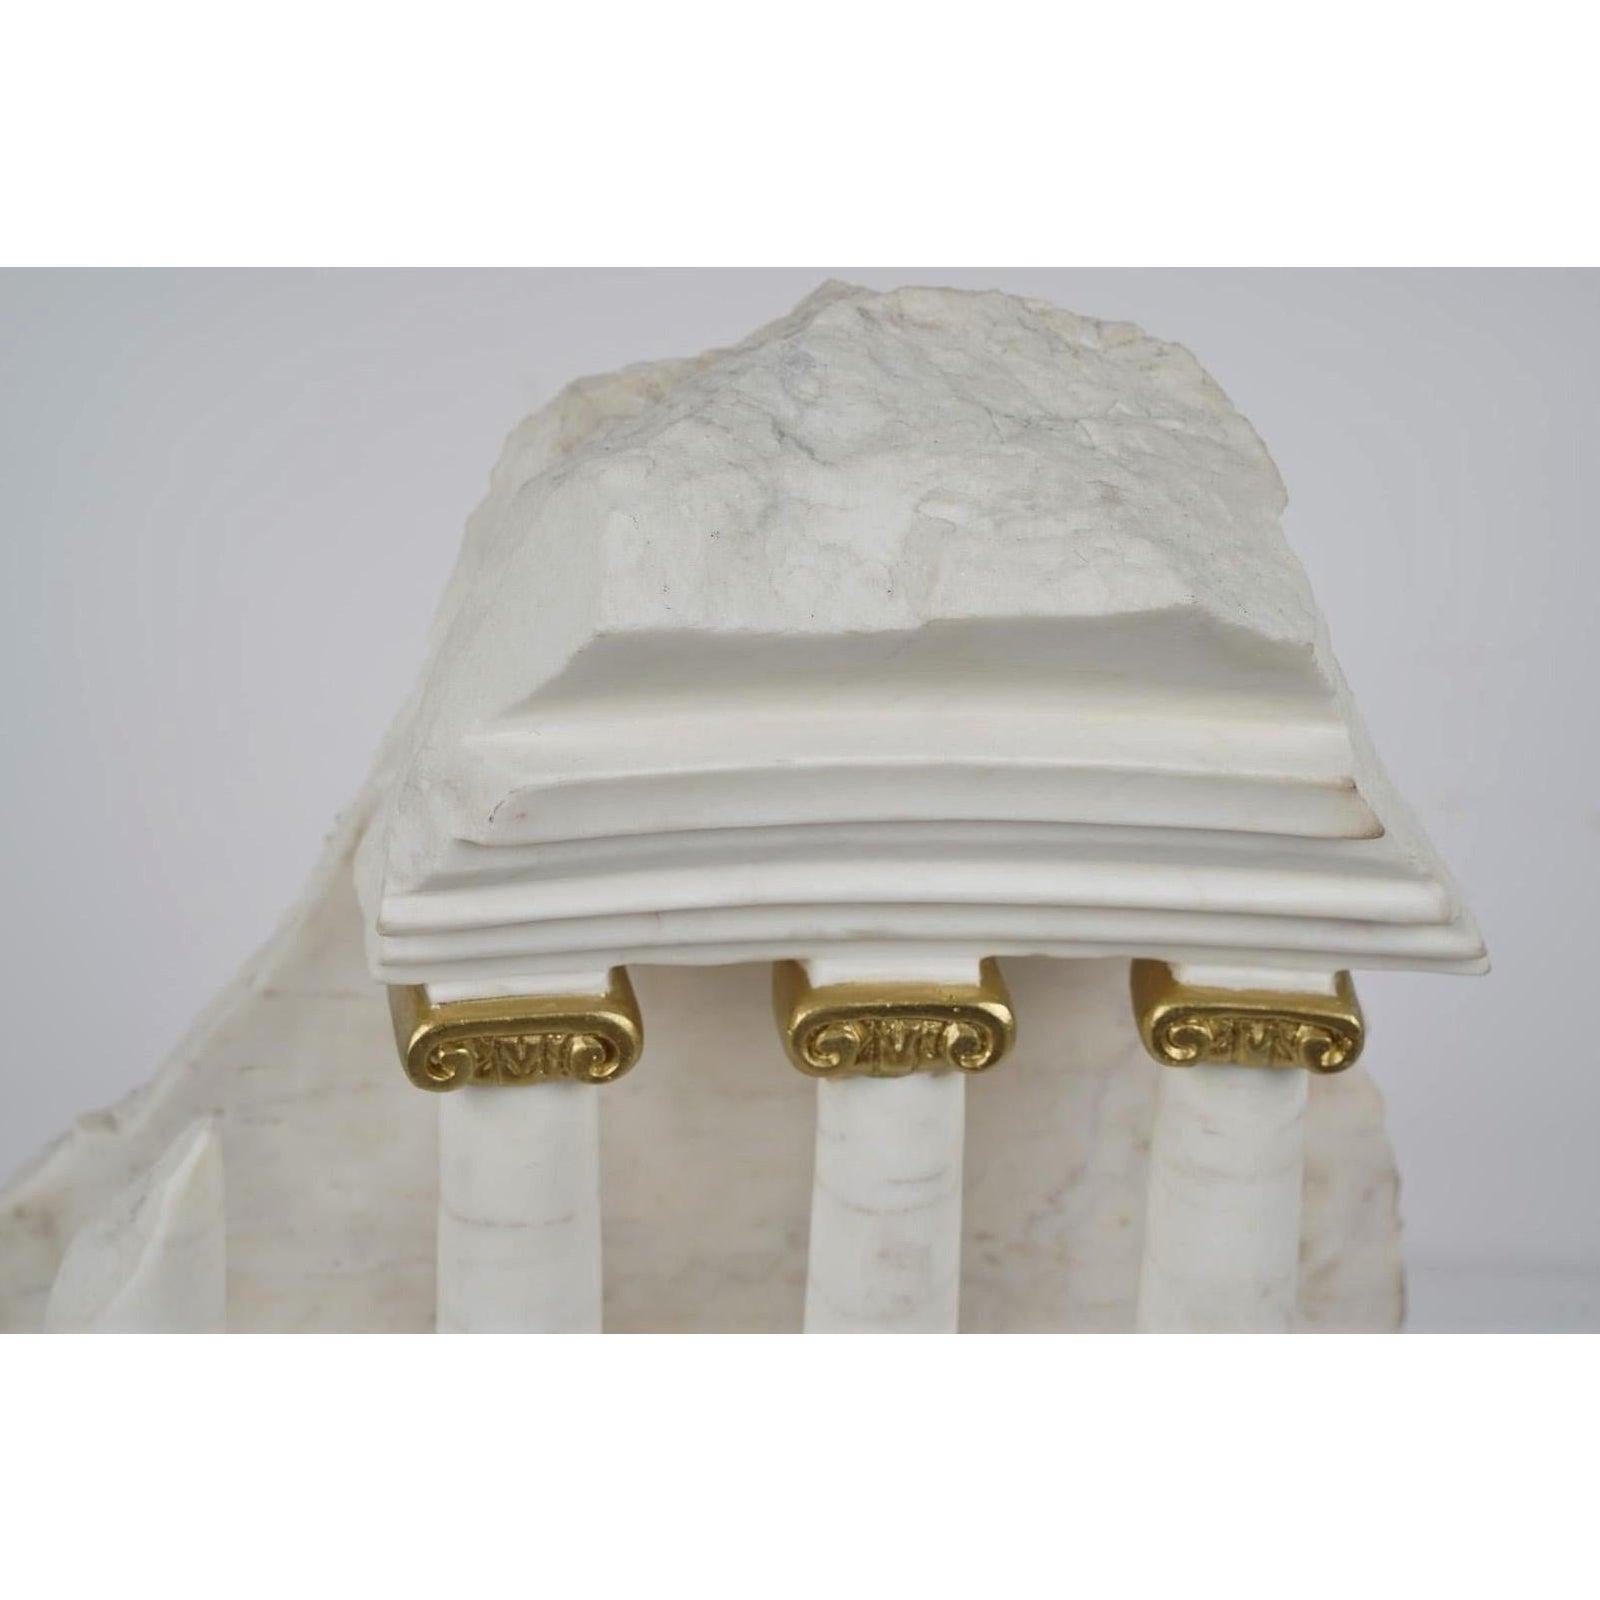 Italian grand tour style carved marble stone ruins sculpture

Additional information:
Materials: marble
Color: white
Art Subjects: Architecture
Period: Early 20th Century
Styles: Grand Tour
Item Type: Vintage, Antique or